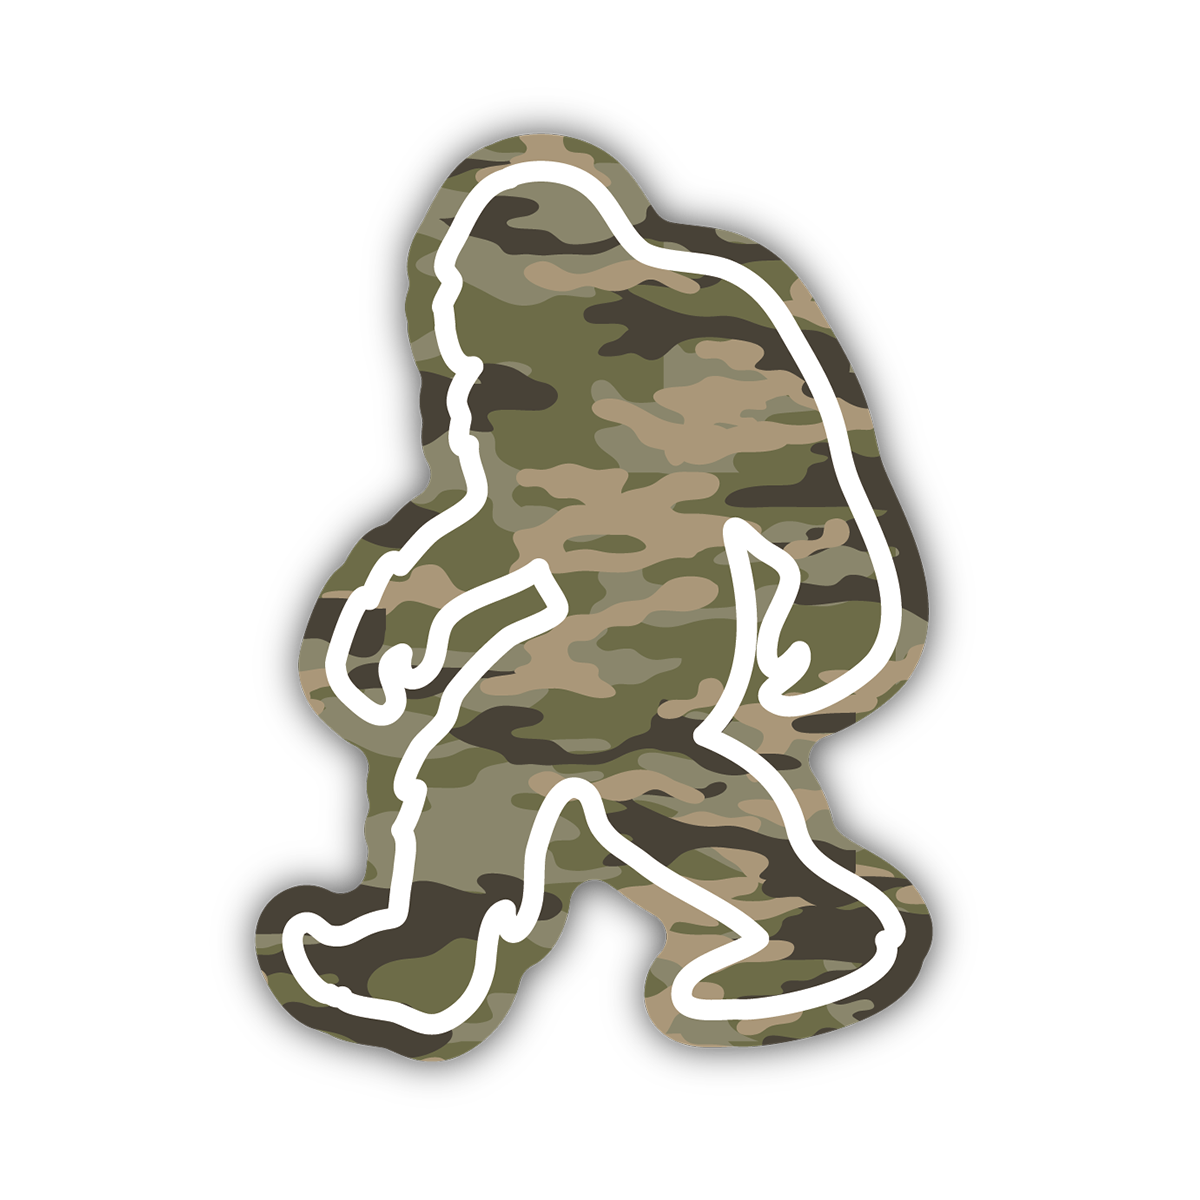 sticker on white background. sticker has graphic of sasquatch outline with a camouflaged background.